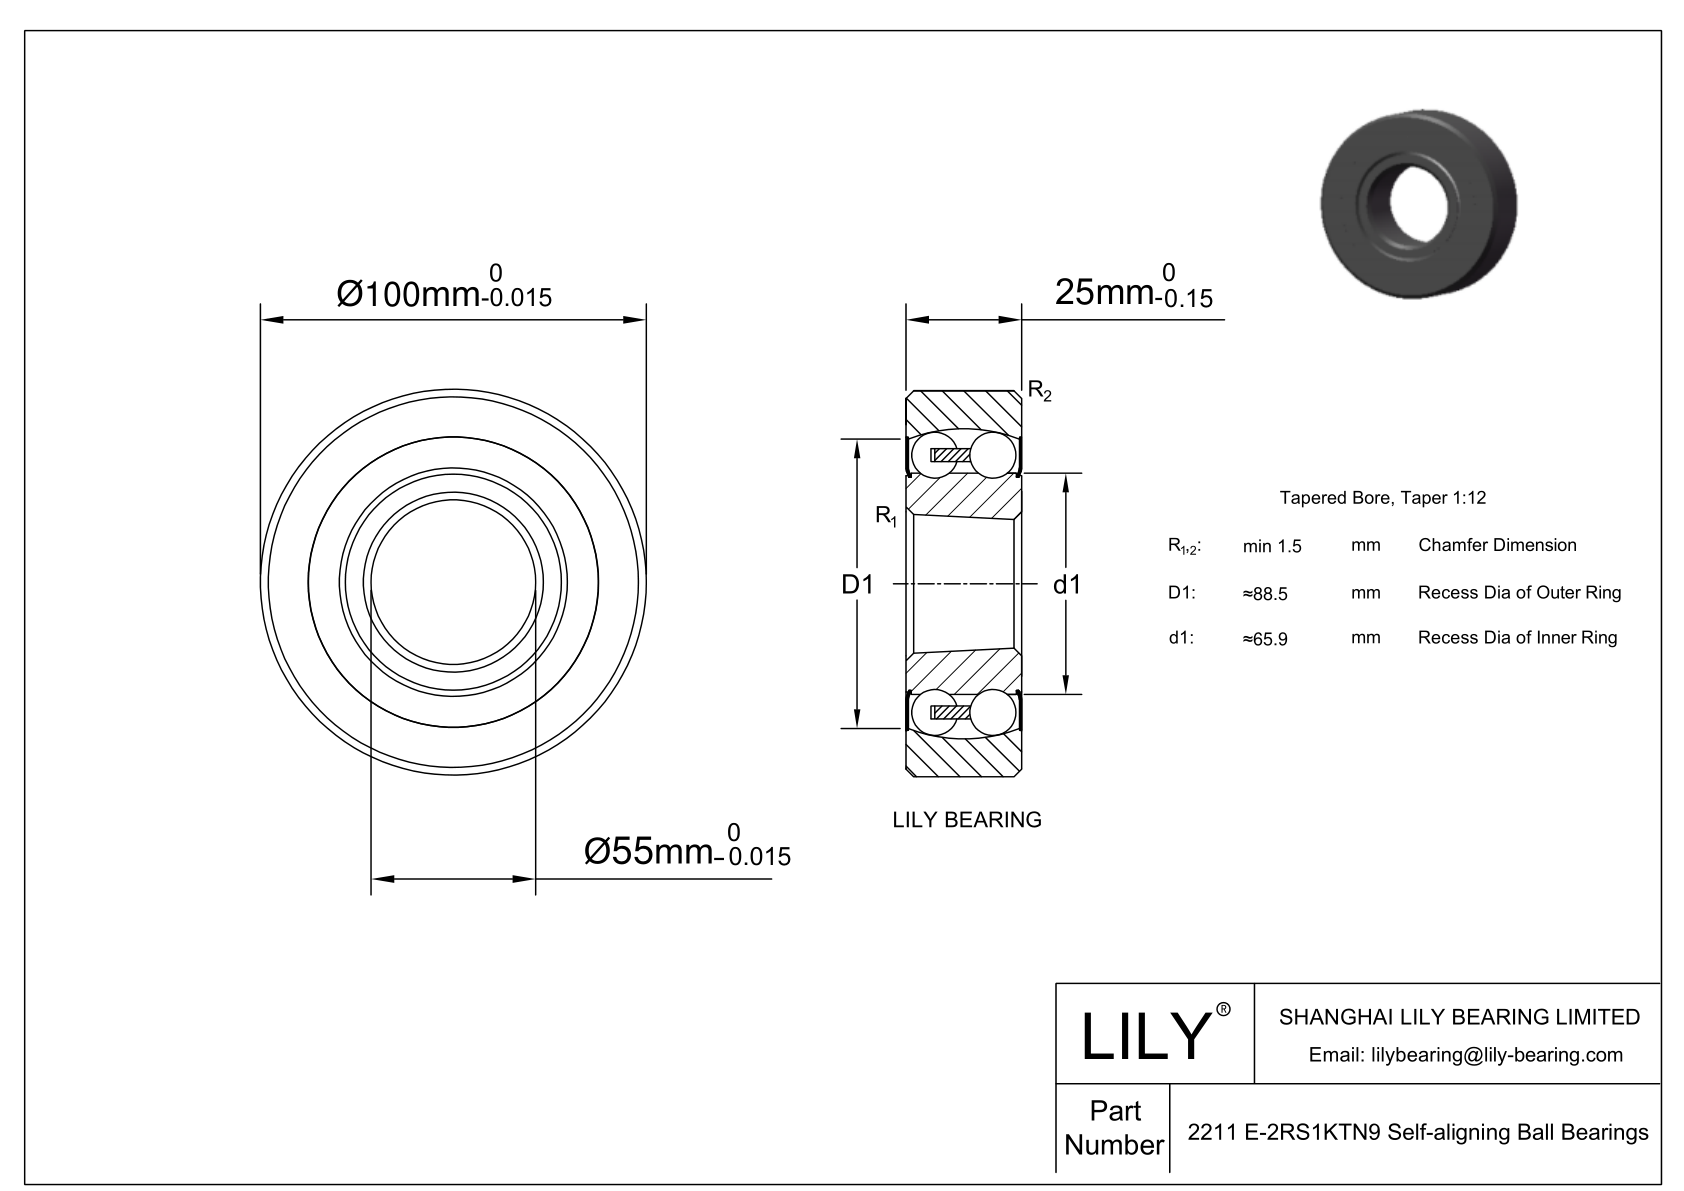 CE2211 E-SIPP Silicon Nitride Self Aligning Ball Bearings cad drawing